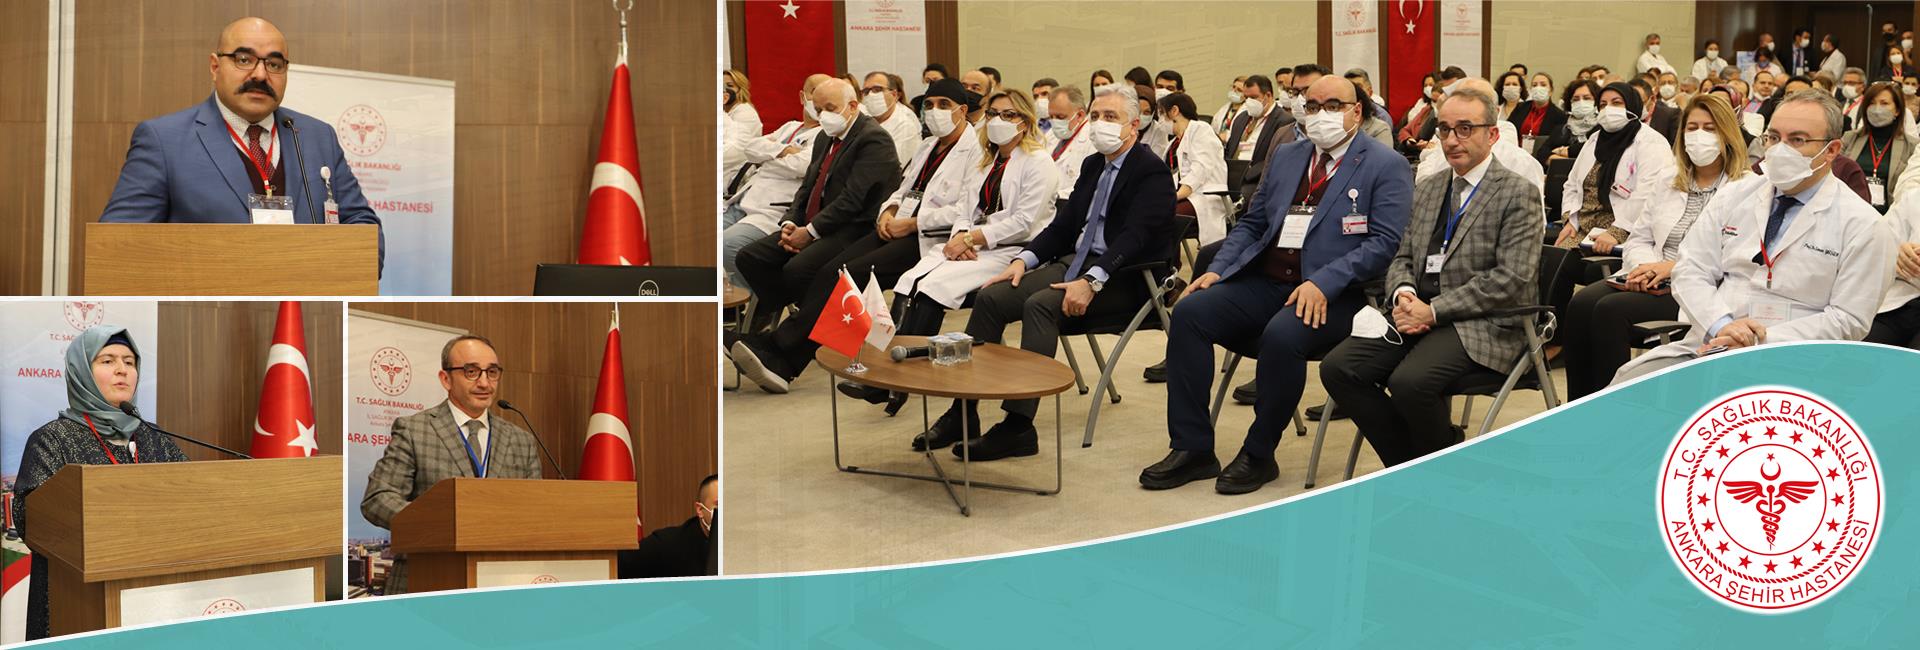 Ankara City Hospital Quality Assessment in Health is successfully completed.